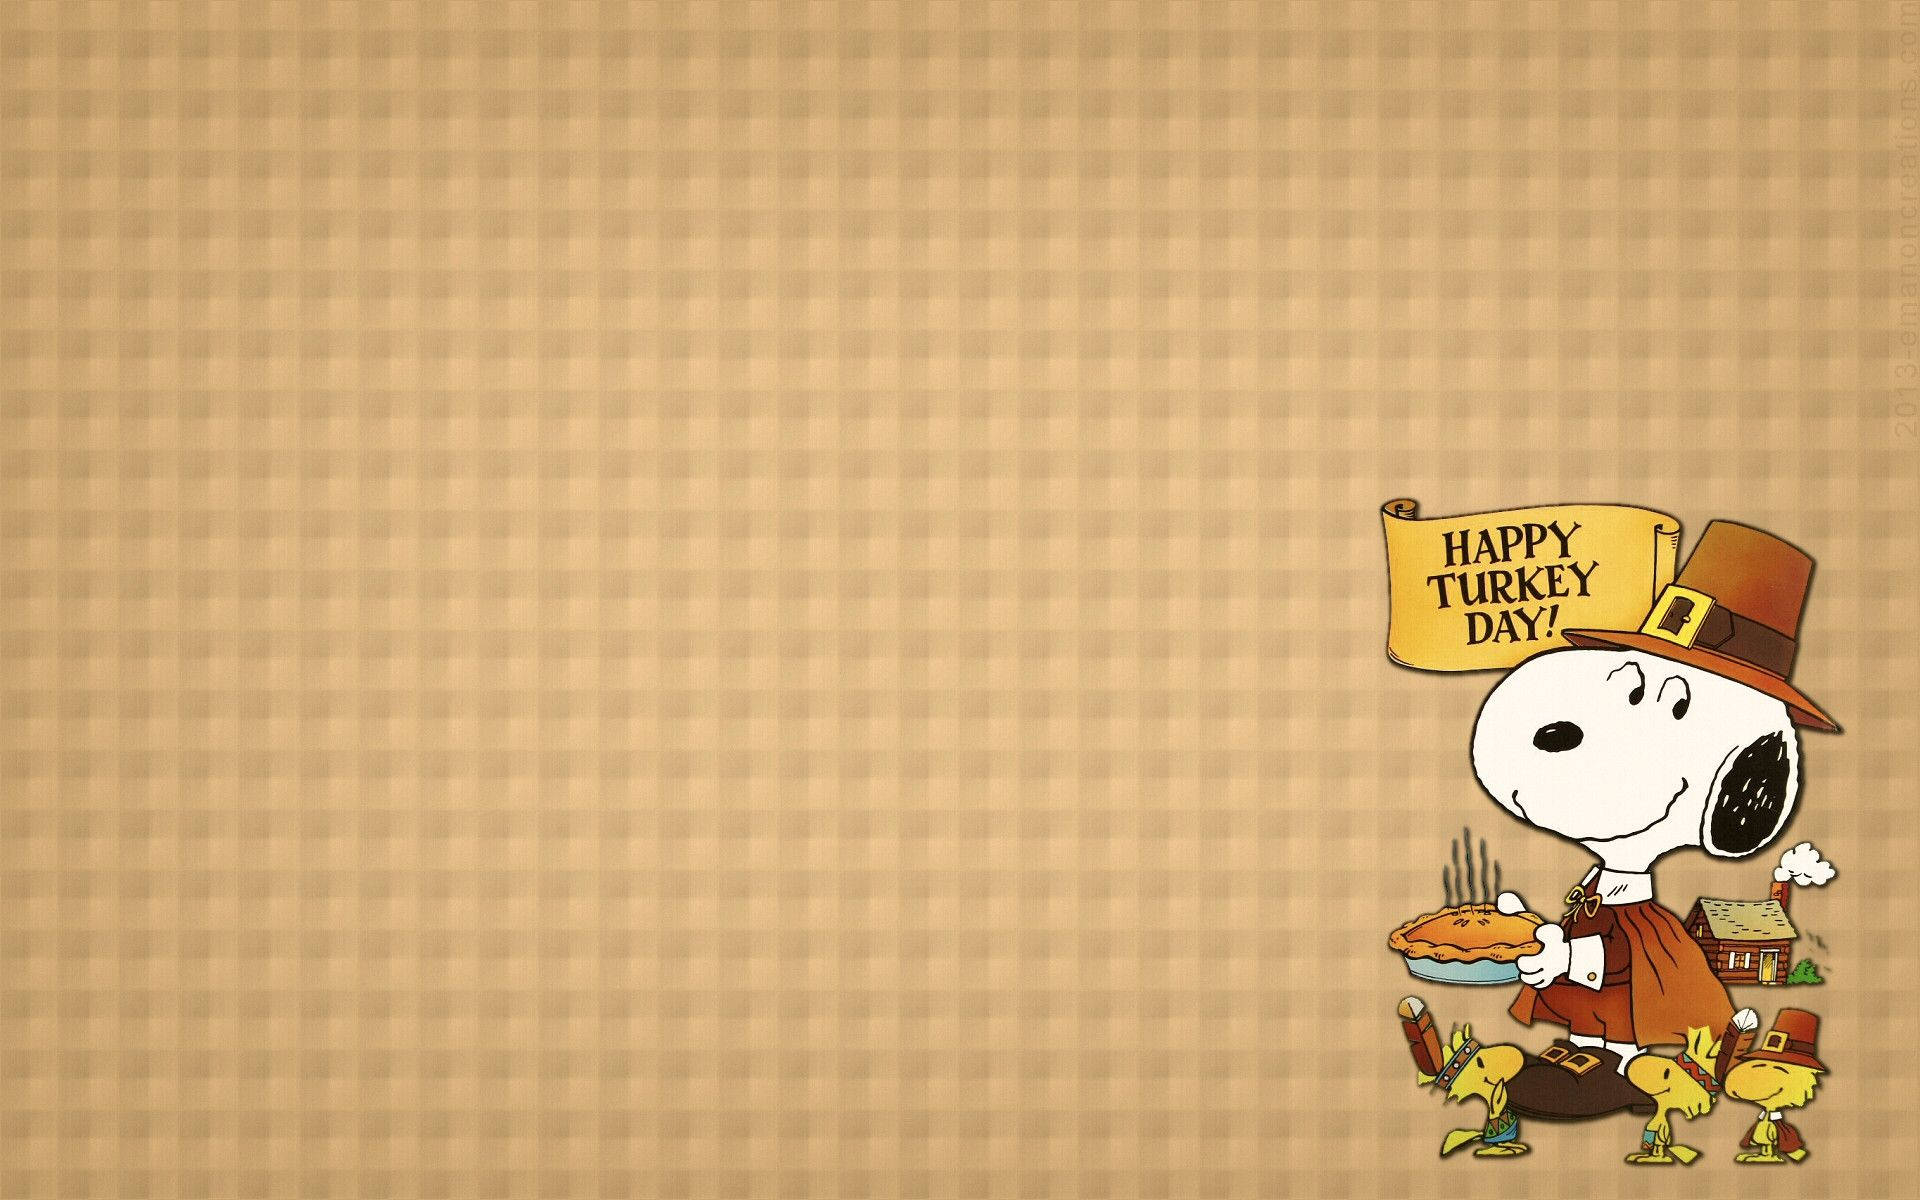 Download Free Snoopy Thanksgiving Wallpaper Discover more Halloween  Pumpkin Snoopy Thanksgiving  Snoopy wallpaper Thanksgiving wallpaper Thanksgiving  snoopy